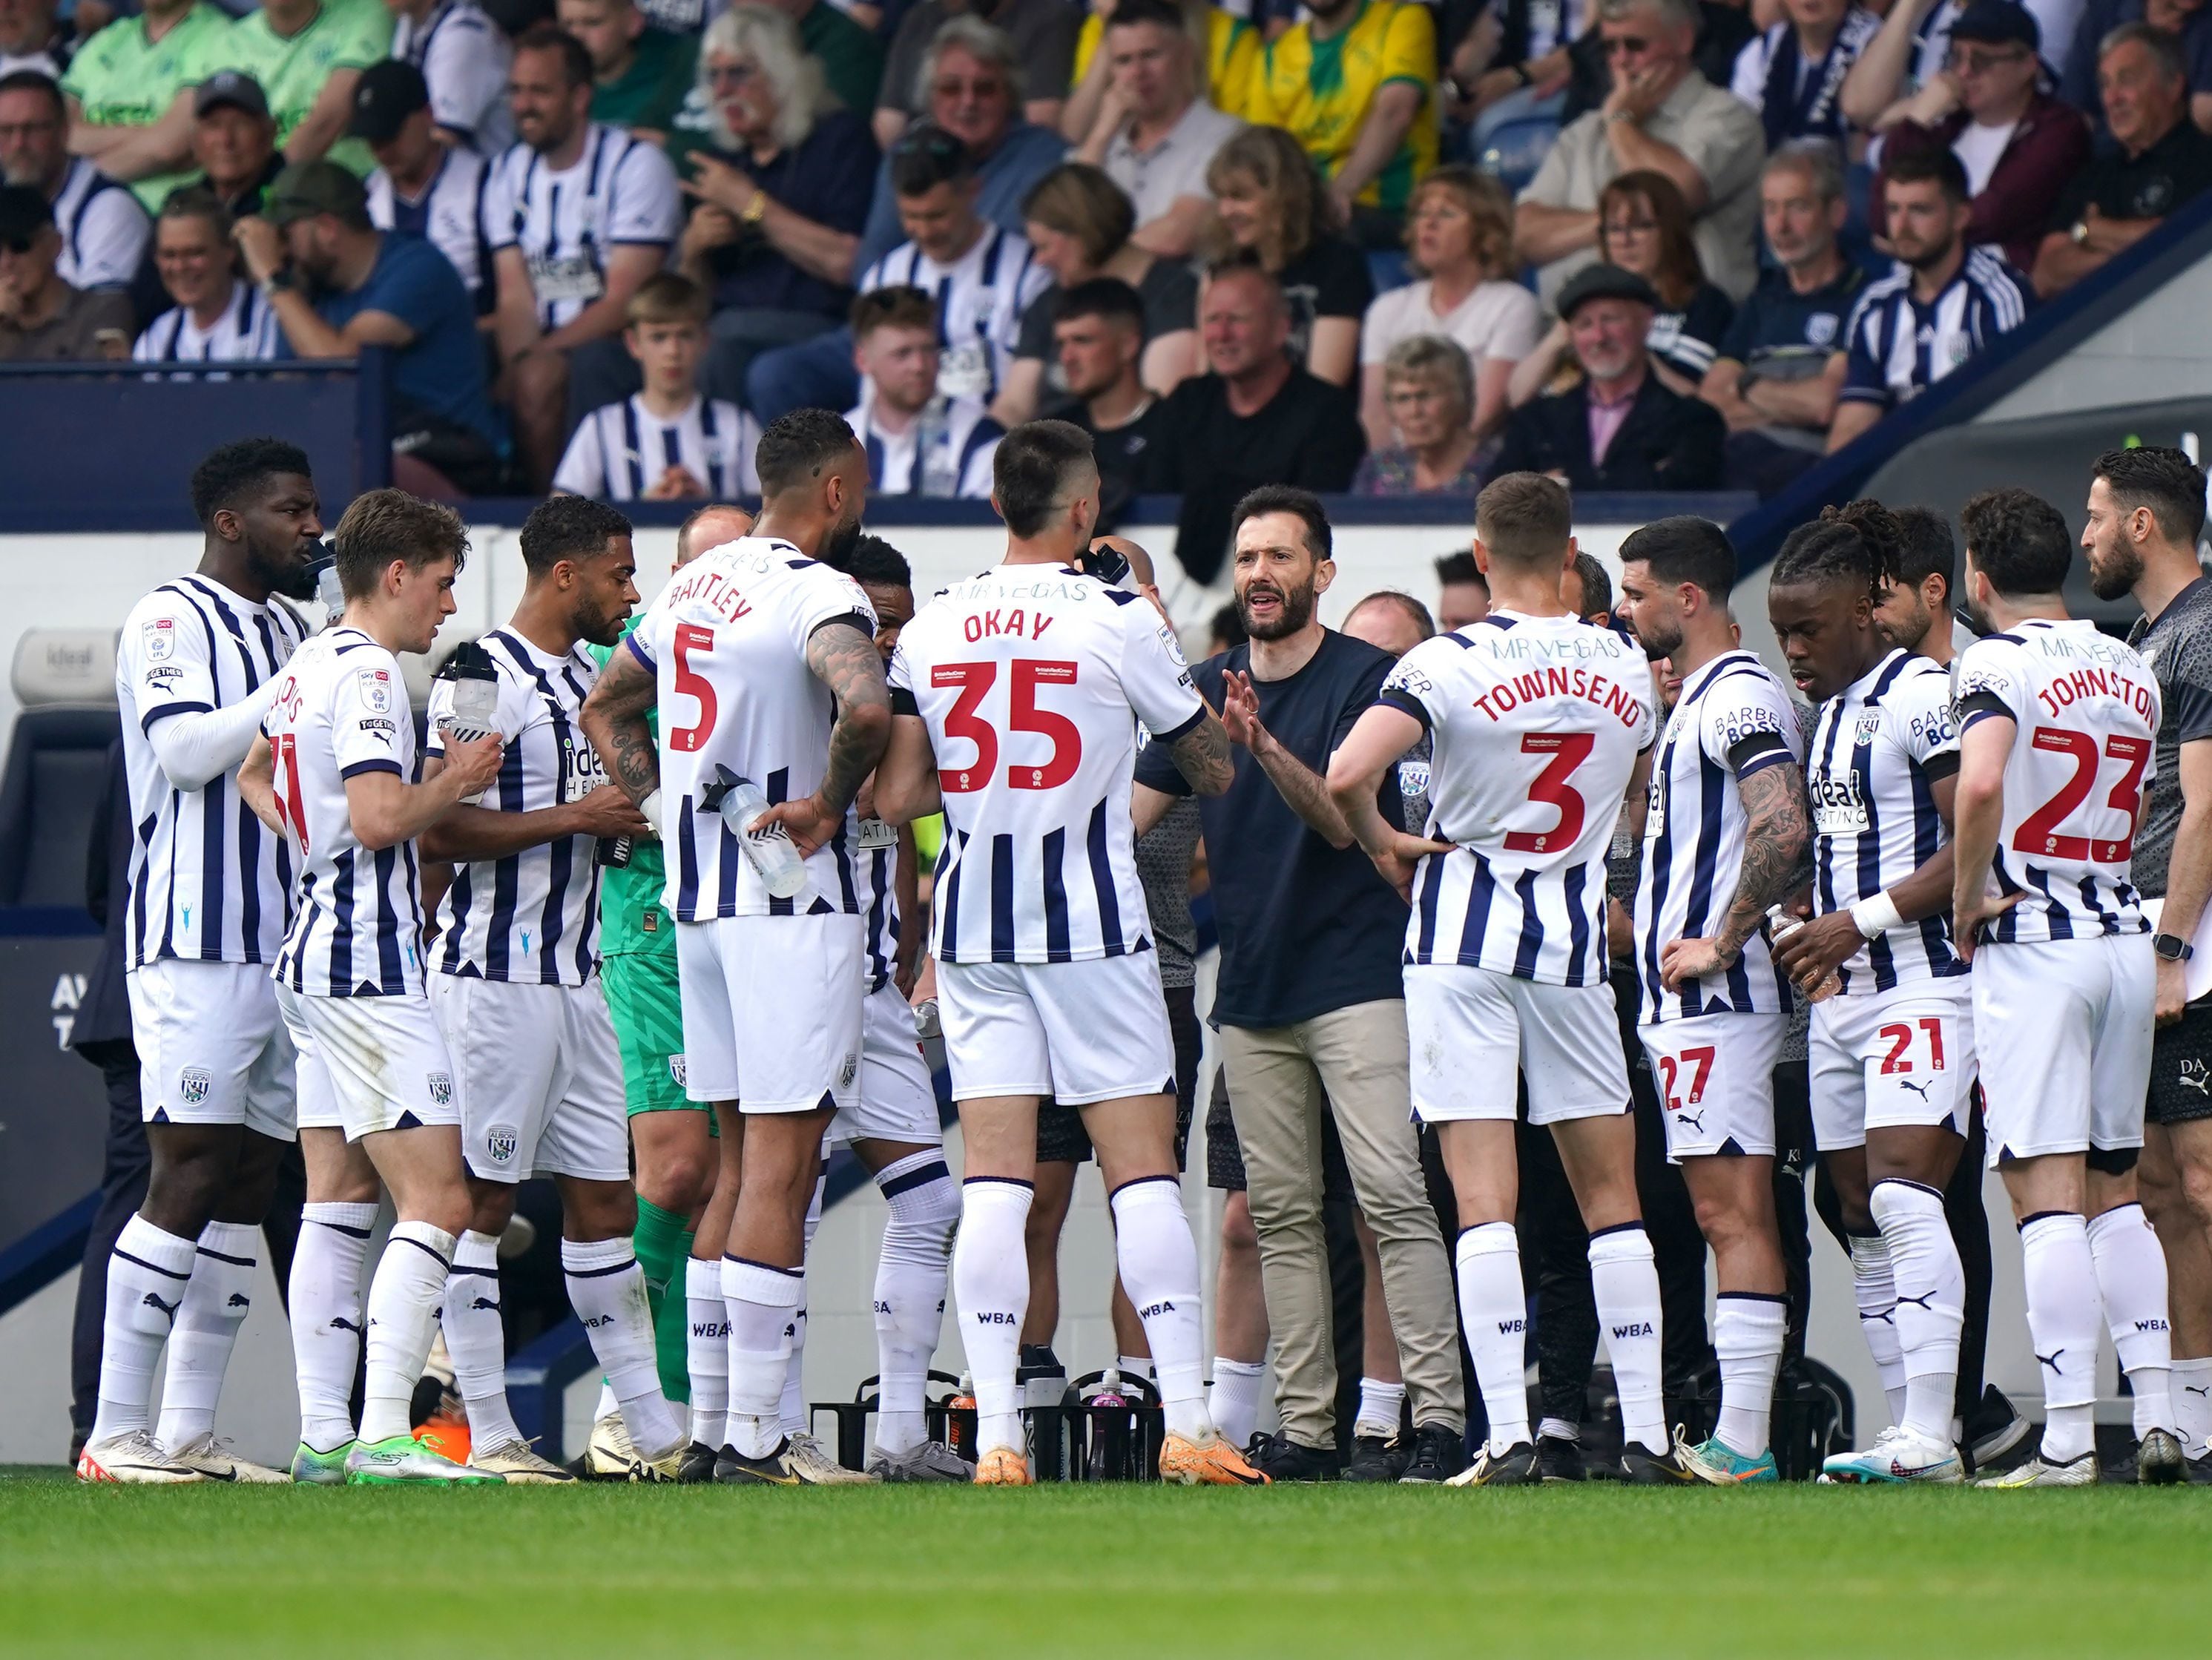 West Brom begin new Championship campaign on the road